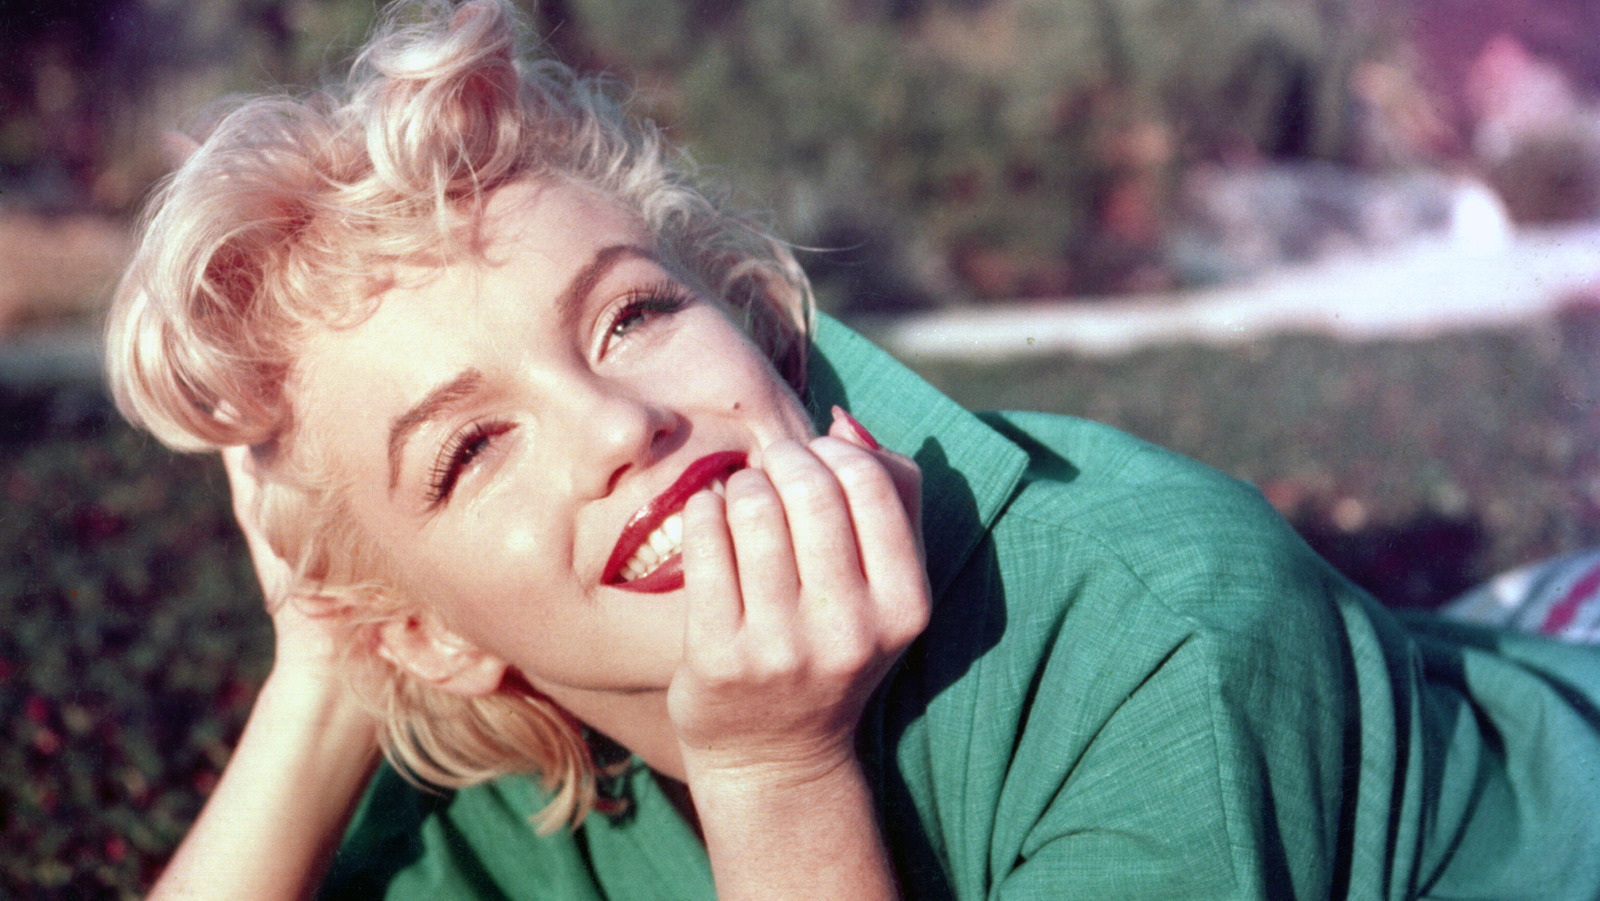 New data show how closely FBI monitored Marilyn Monroe - CBS News